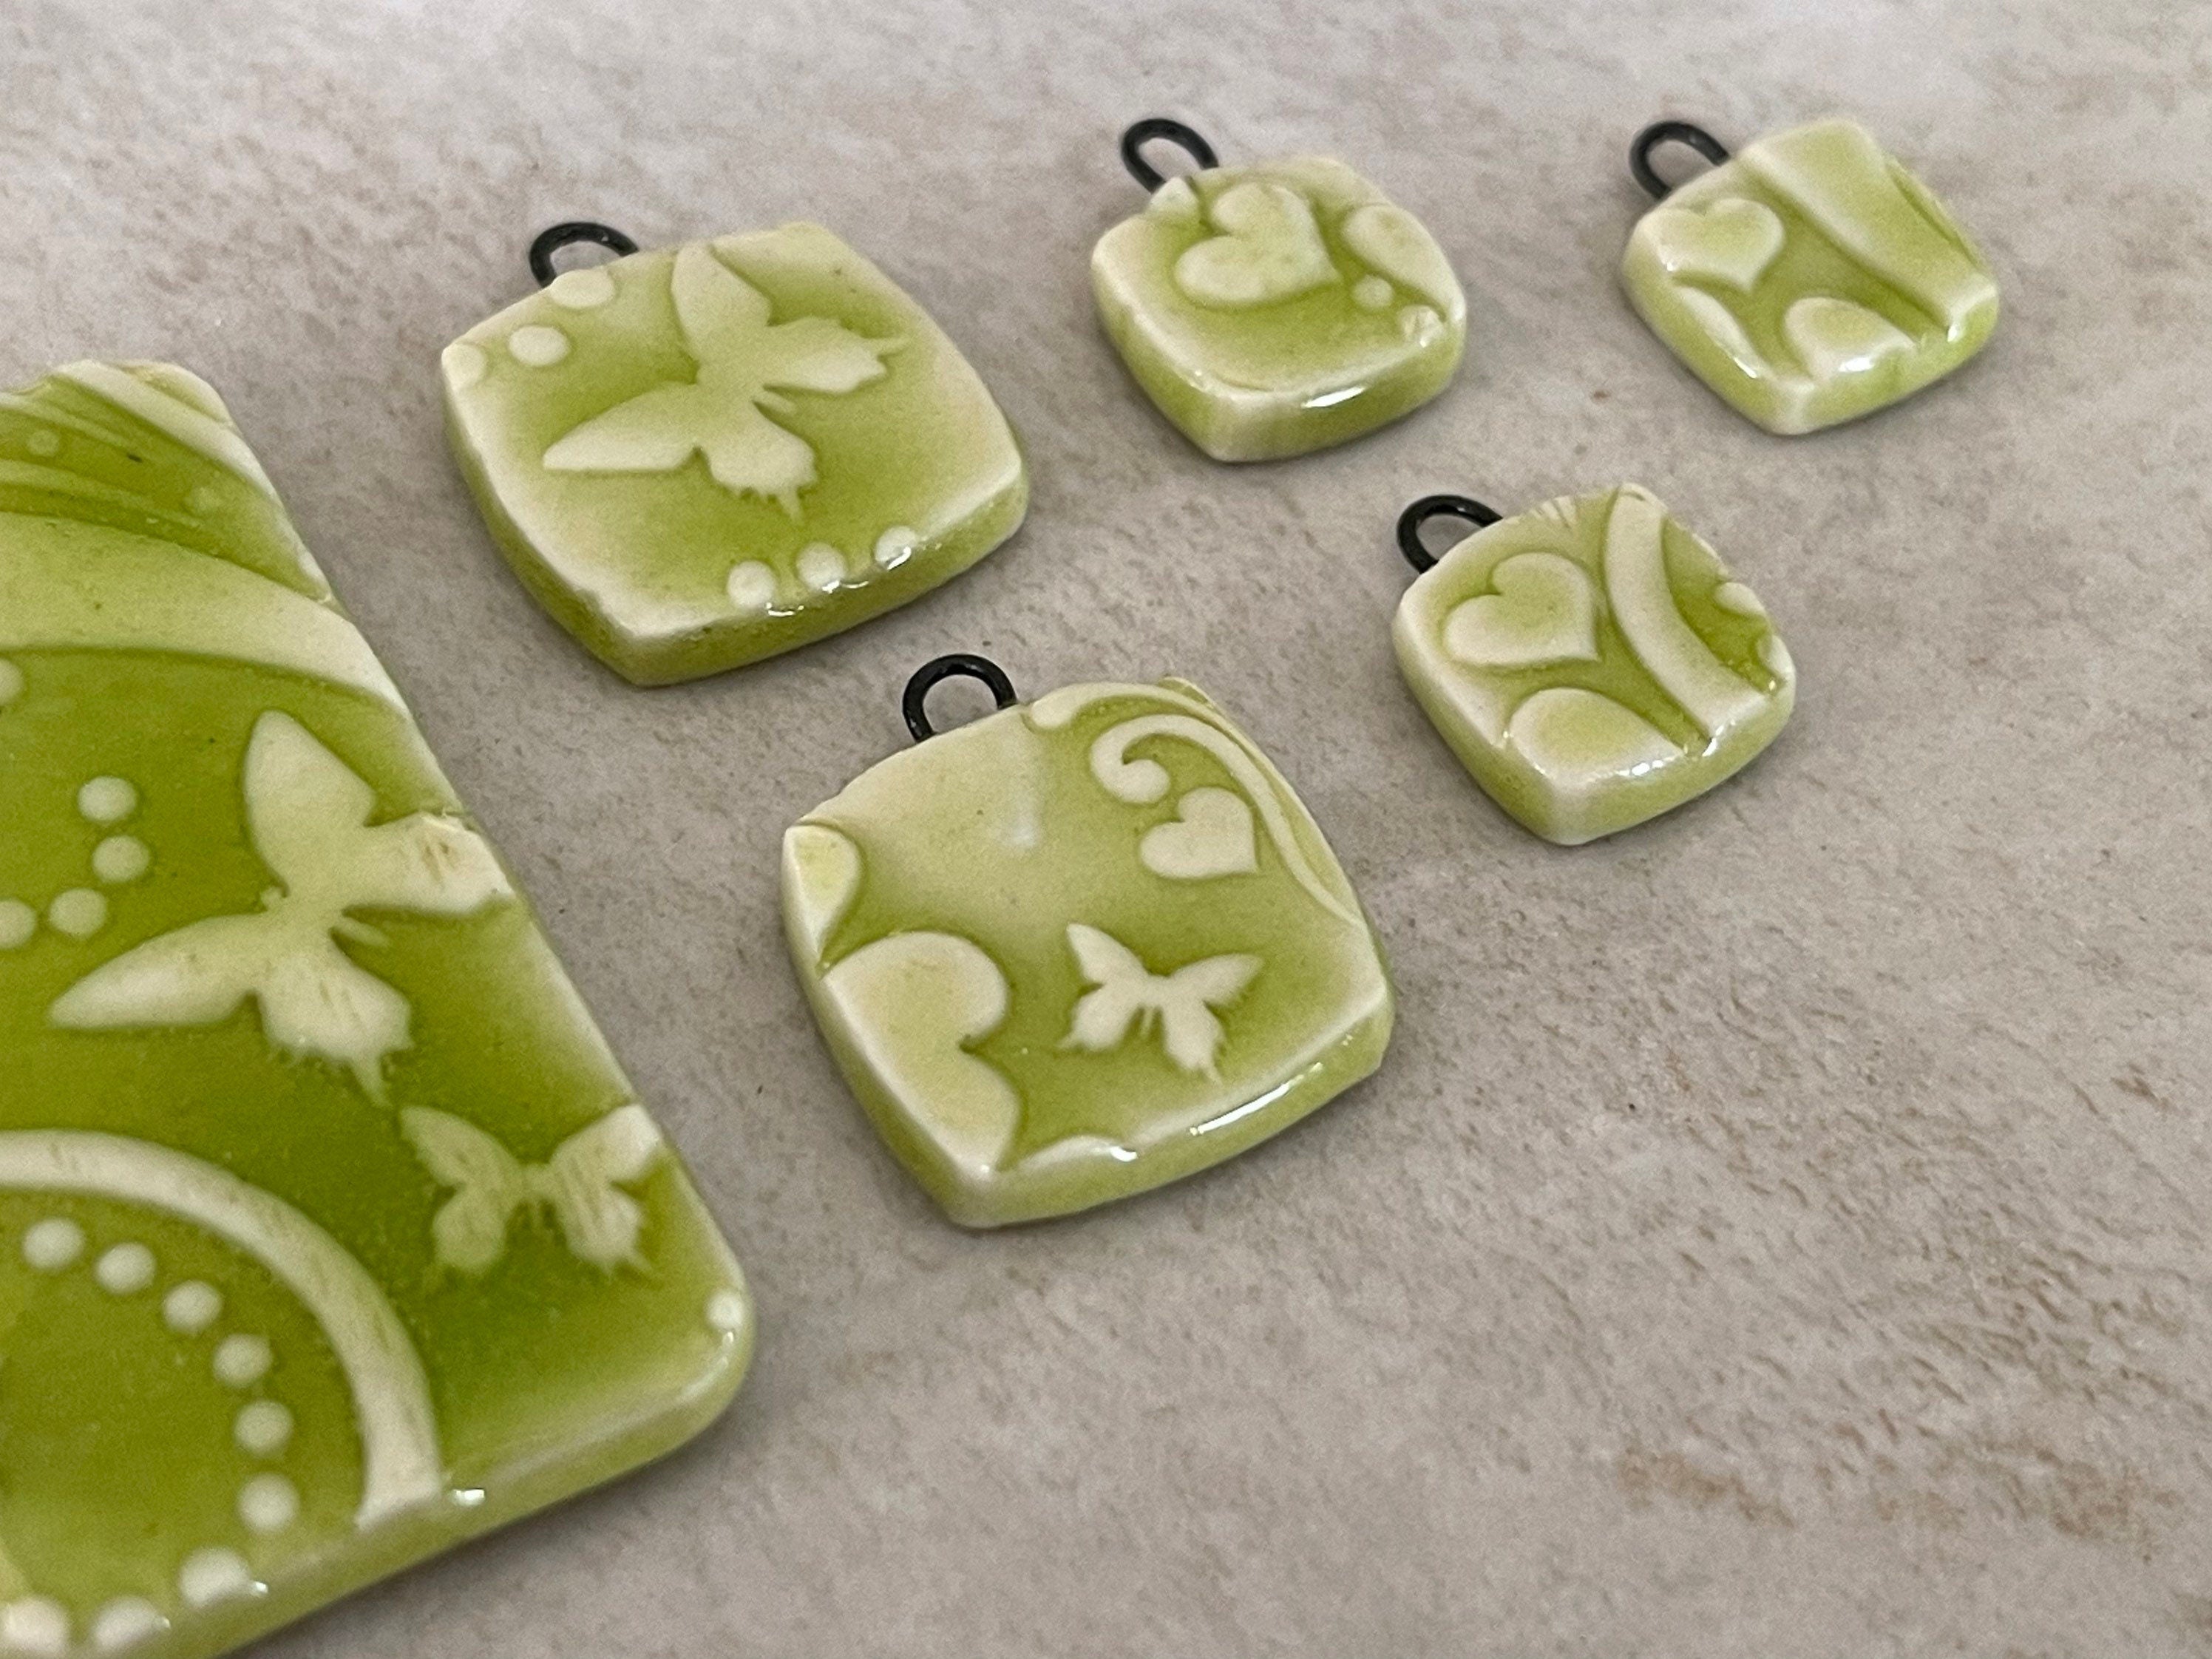 Chartreuse Bead Set, Porcelain Beads, Flower Bead Set, Ceramic Charms, Jewelry Making Components, DIY Earring Beads, Pendant